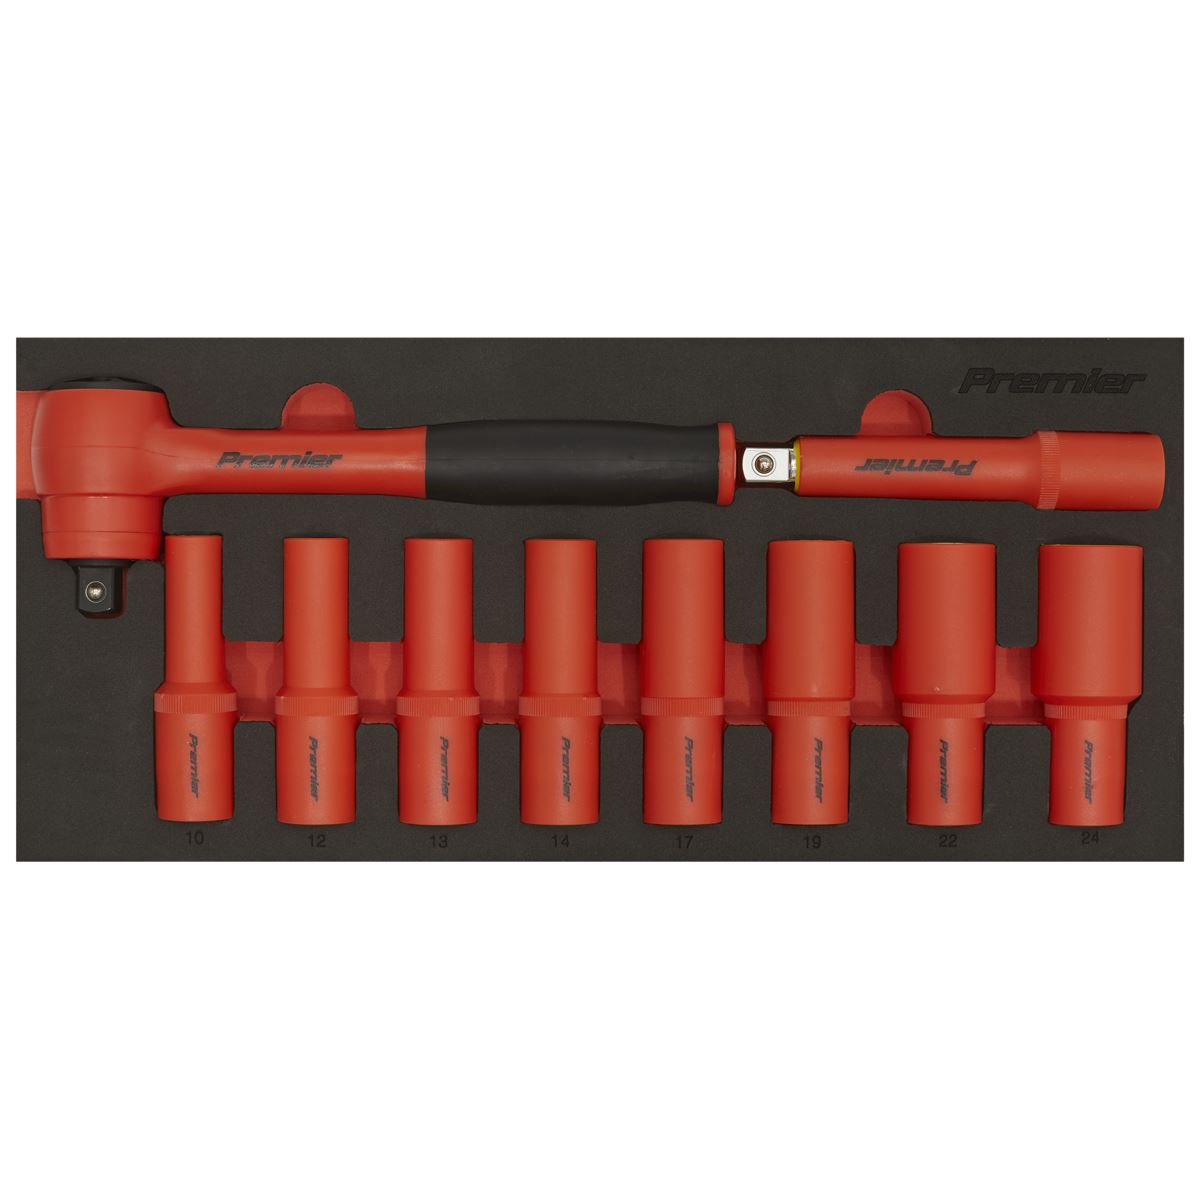 Sealey Premier Insulated Socket Set with Tool Tray 10pc 1/2"Sq Drive - VDE Approved